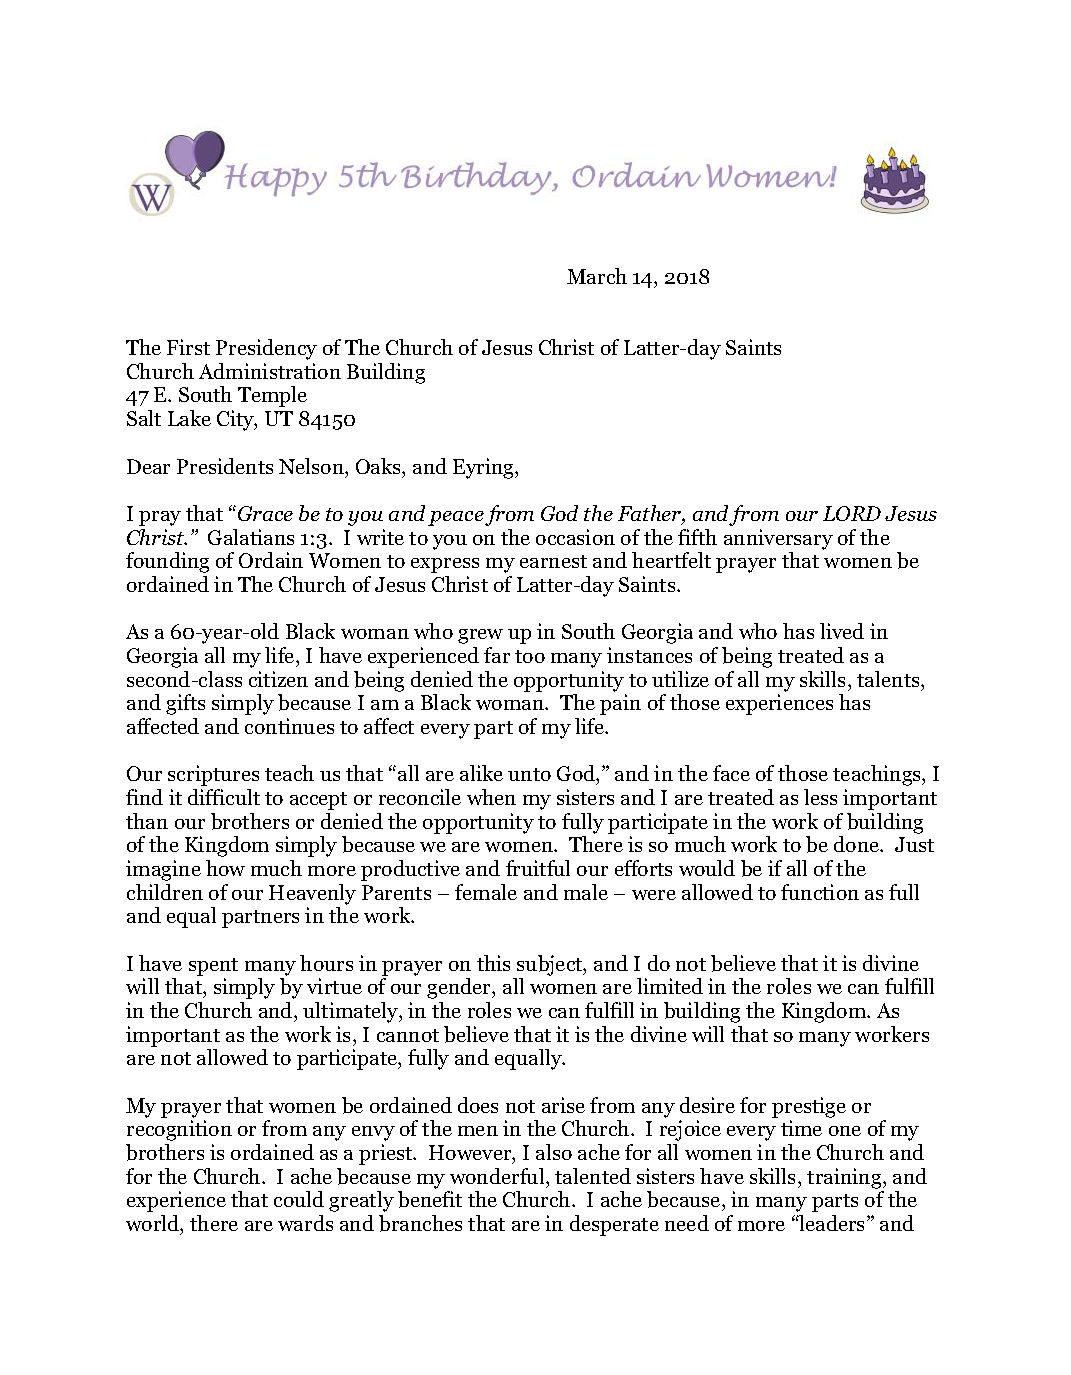 An image of page 1 of Bryndis's letter to First Presidency. printed with the Ordain Women 5th Birthday letterhead. The text of the letter is the text of this post.